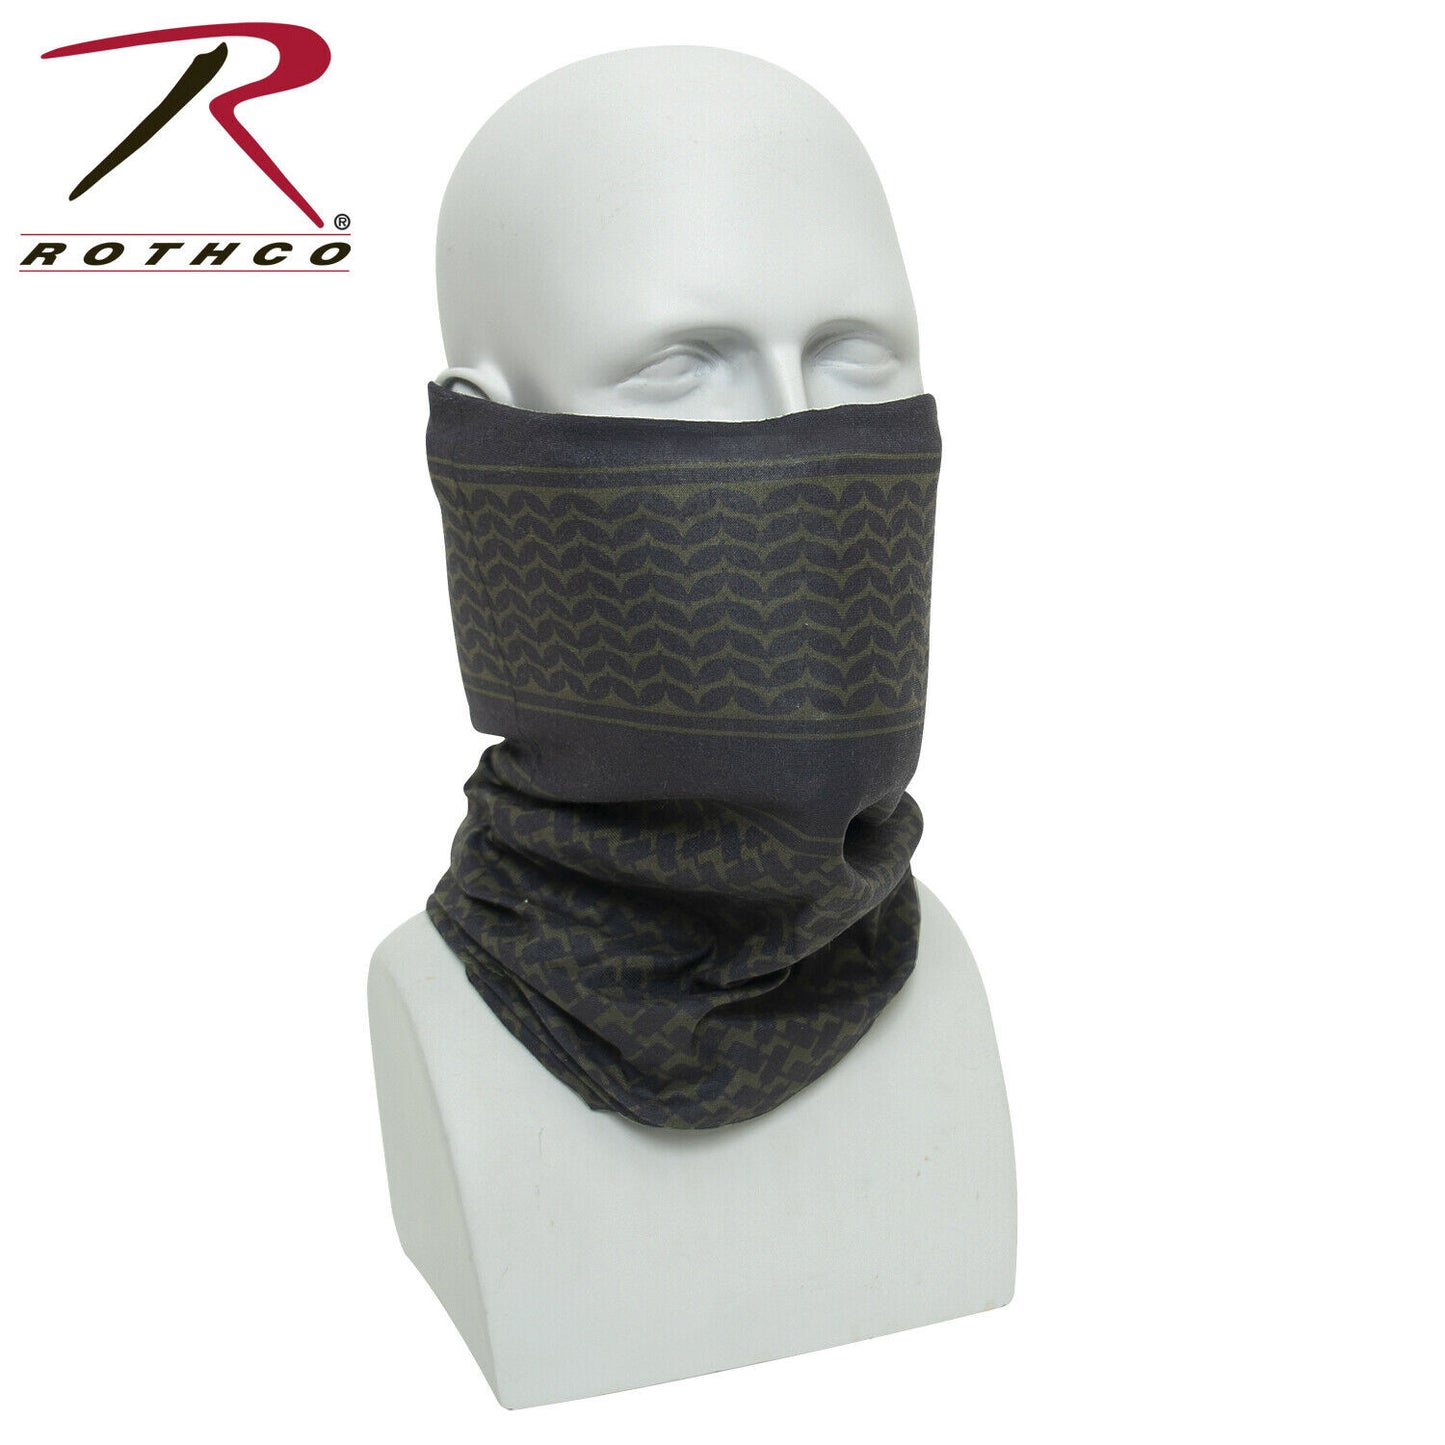 Rothco Multi-Use Tactical Wrap with Shemagh Print - Olive Drab or Coyote